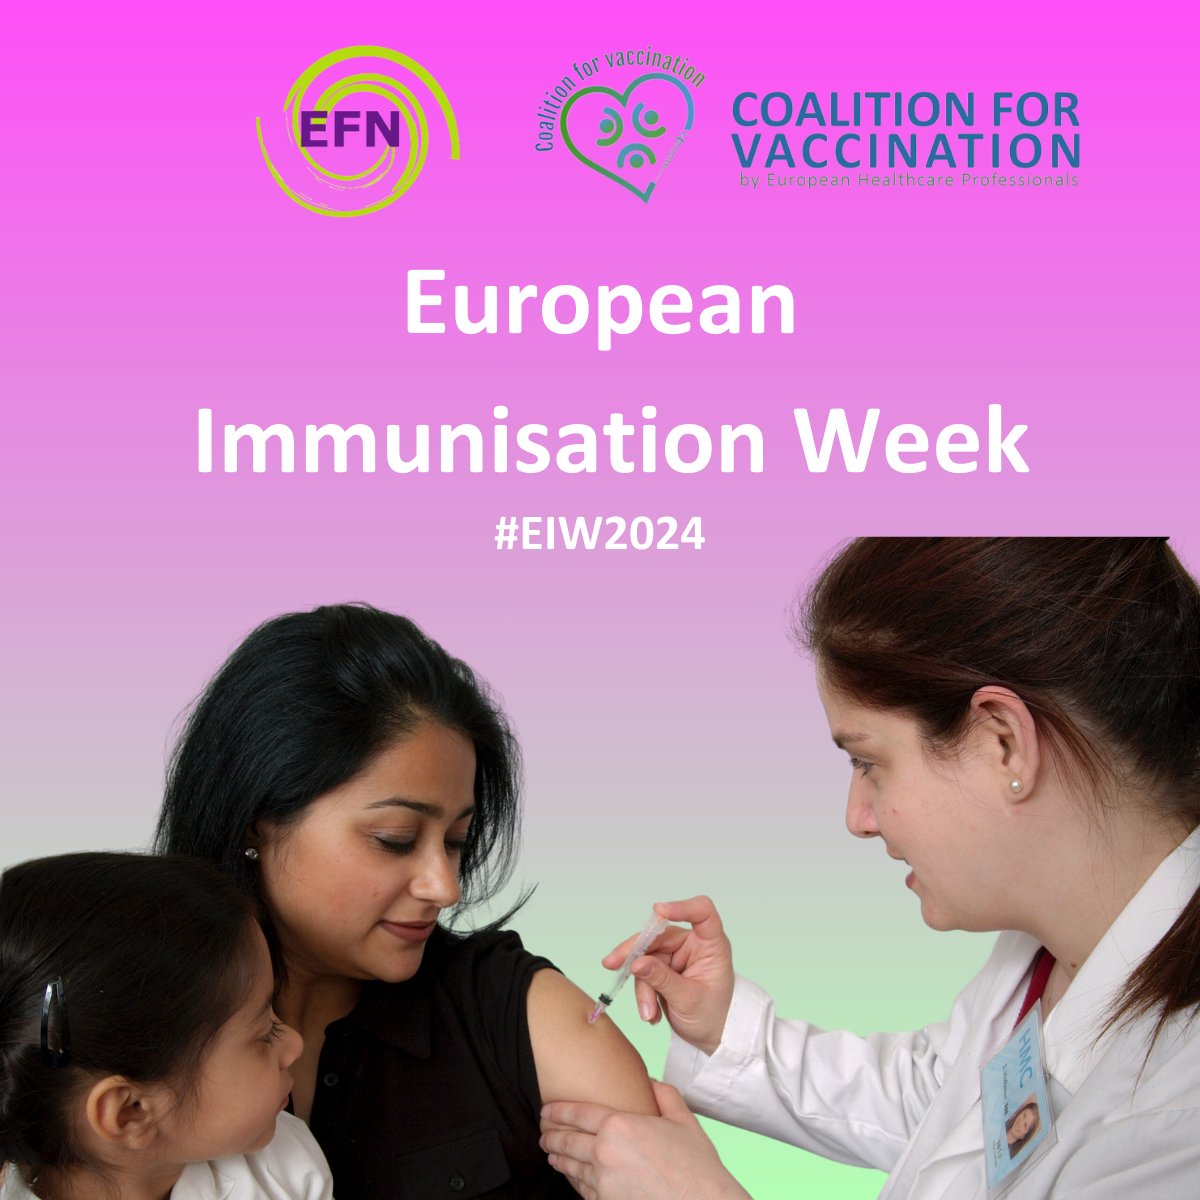 Vaccines are safe for the whole family! Keep up with your immunisation and protect your loved ones. #EFN #EIW2024 #GetVaccinated #Nursesforvaccination #Nurses #Prevention #Longlifeforall #EPI #Vaccinesforall #vaccination #coalitionforvaccination #UnitedInProtection